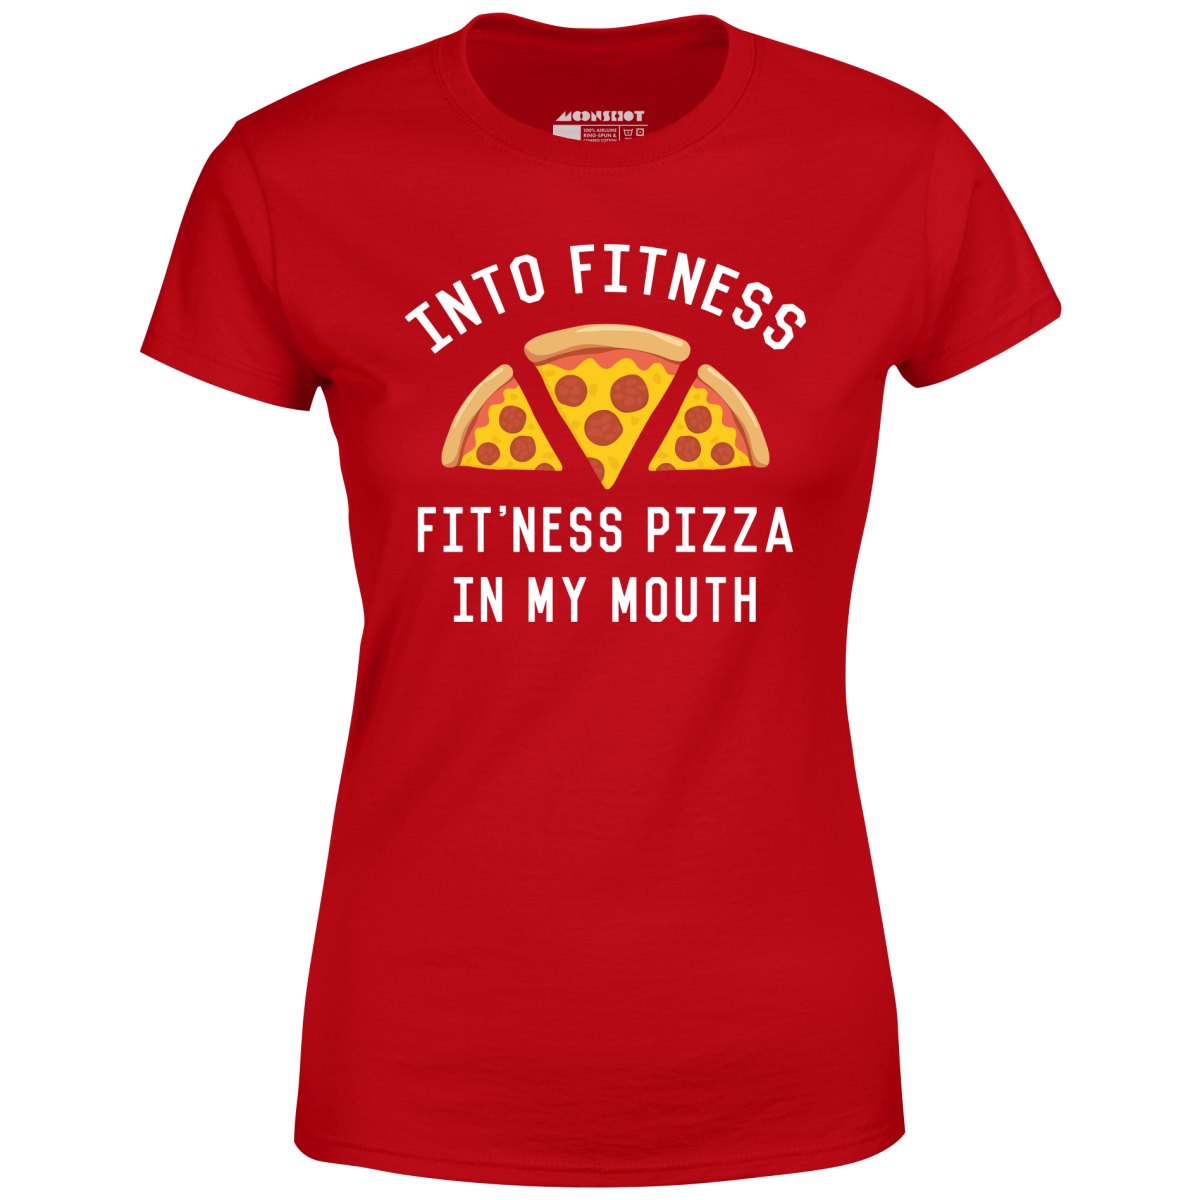 Into Fitness, Fitness Pizza in My Mouth - Women's T-Shirt